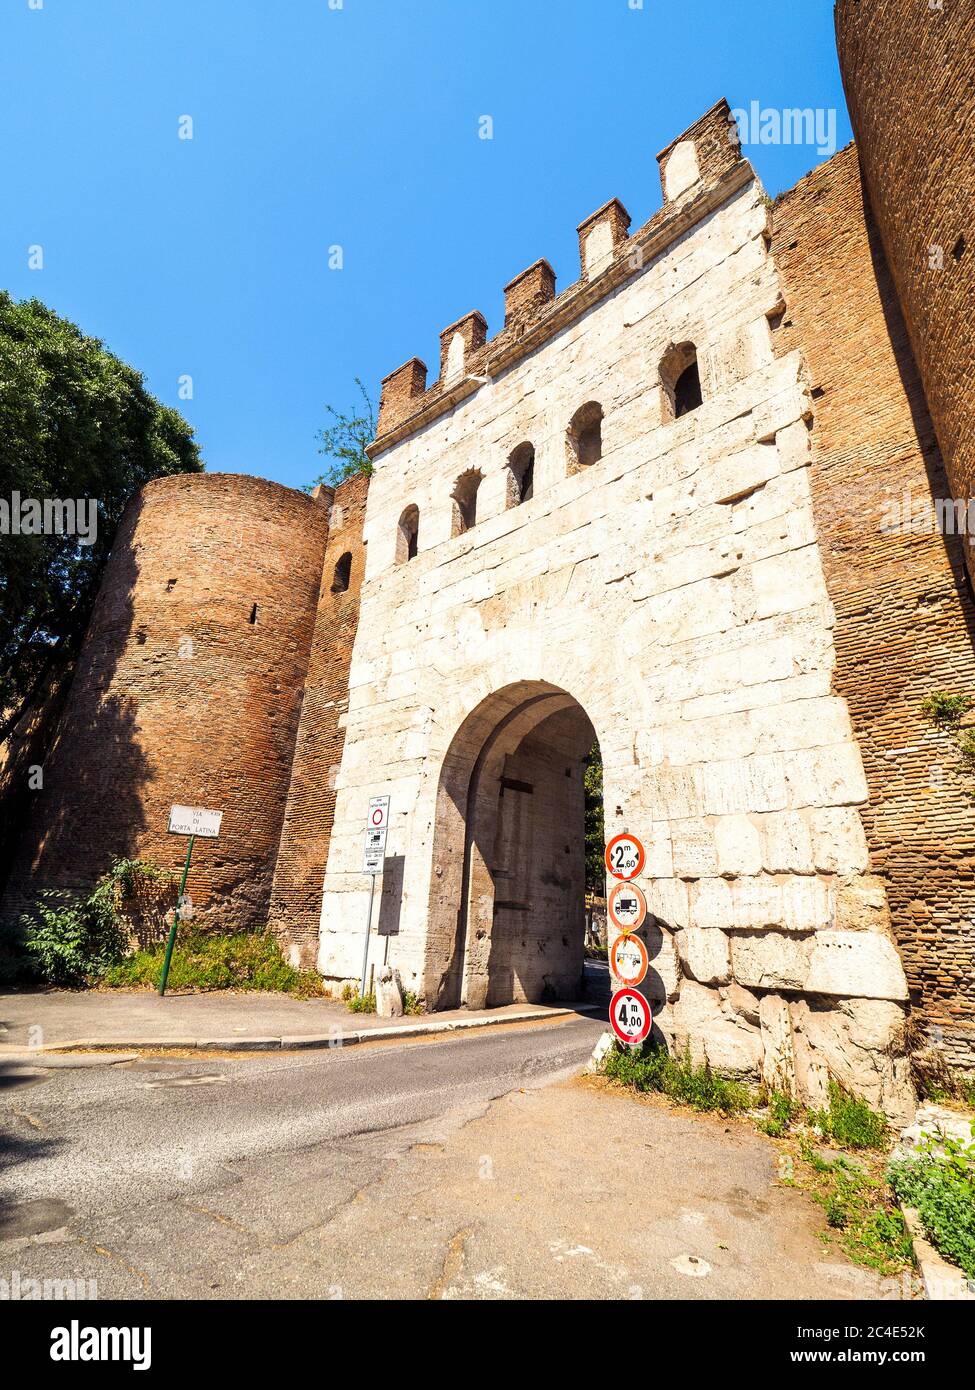 Porta Latina is a single-arched gate in the Aurelian Walls of ancient Rome - Rome, Italy Stock Photo